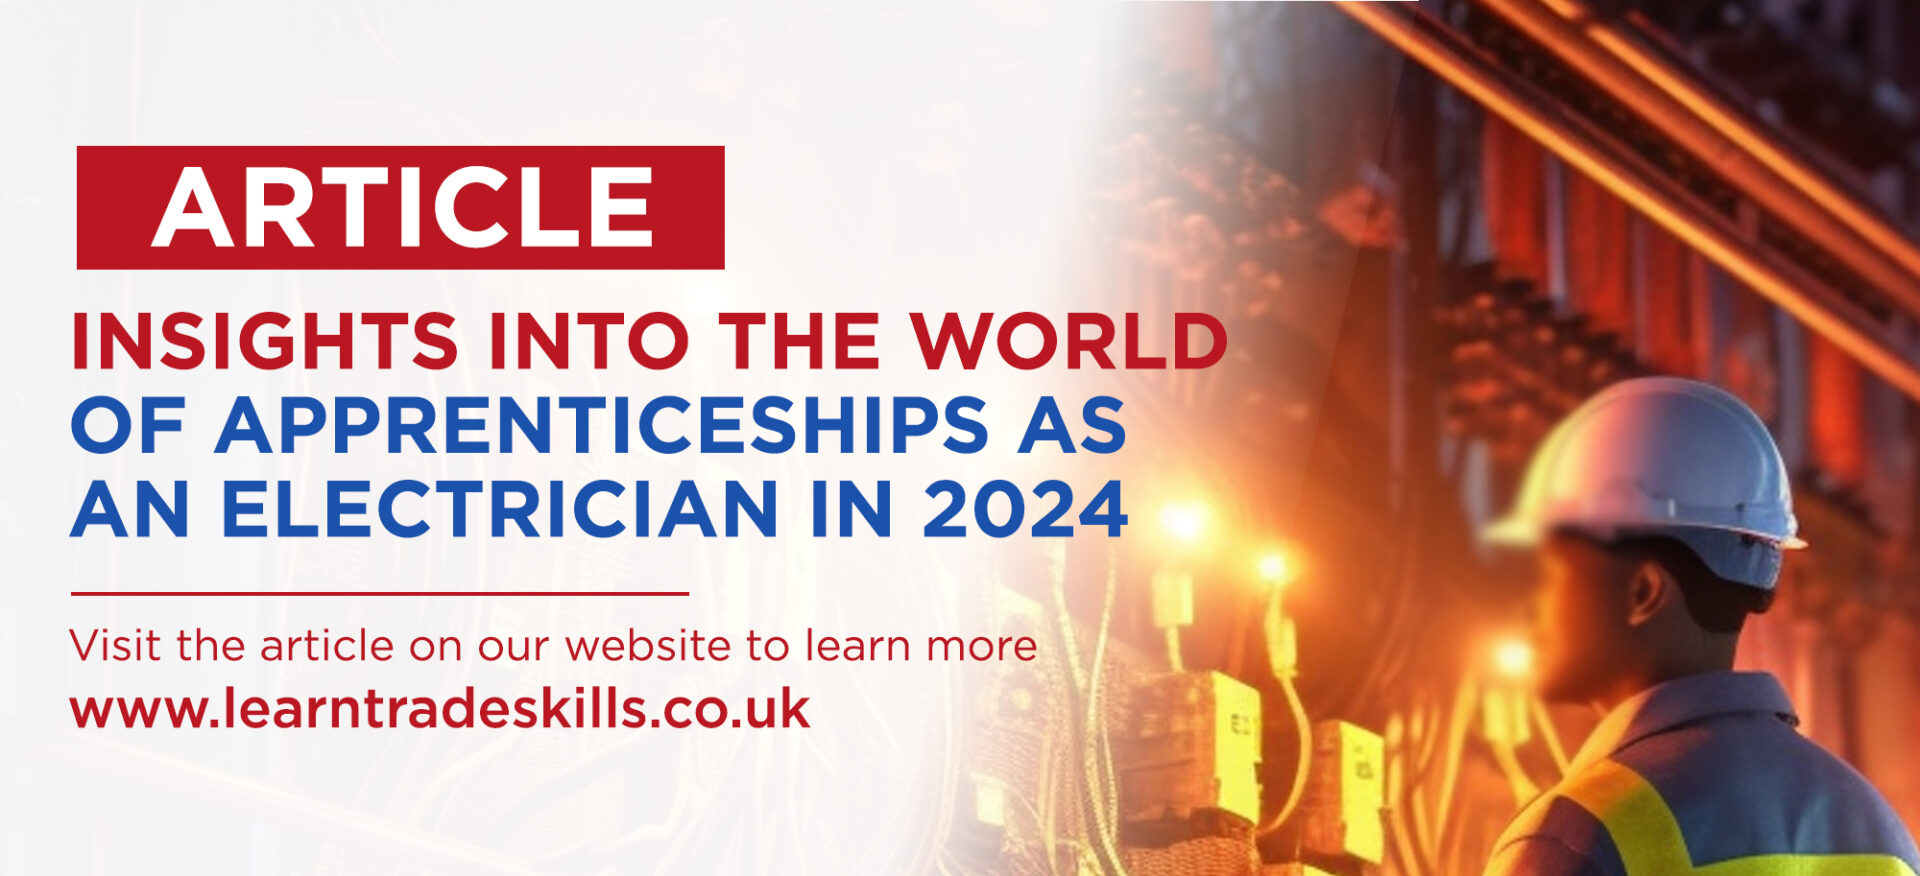 WORLD OF APPRENTICESHIPS AS AN ELECTRICIAN